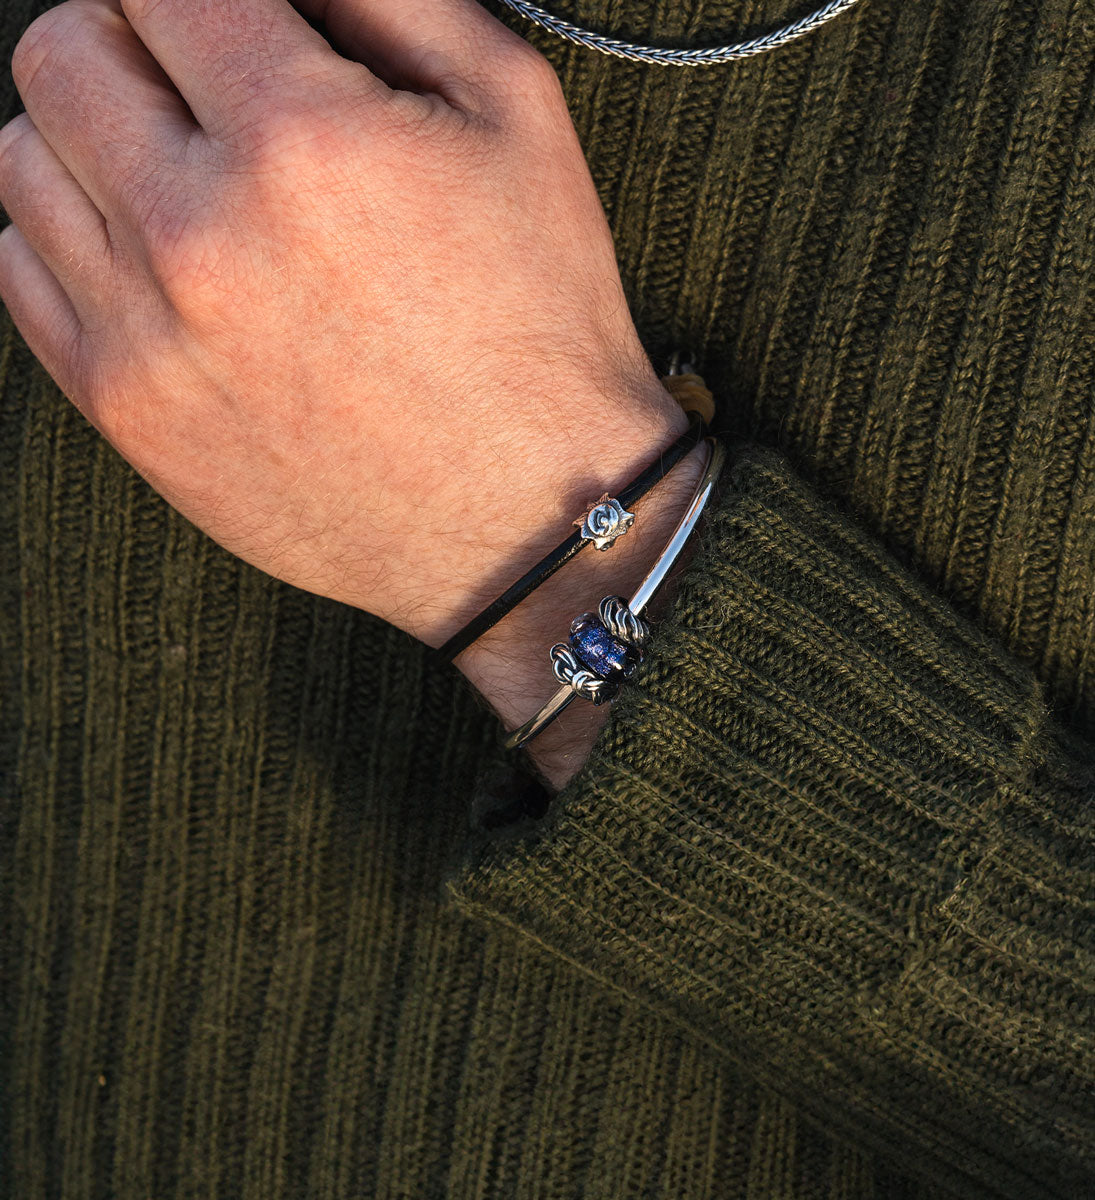 Trollbeads Sunshine silver bead on a leather bracelet complemented by a silver bangle with a blue glass bead and two silver spacers on a male model wearing a green knit sweater